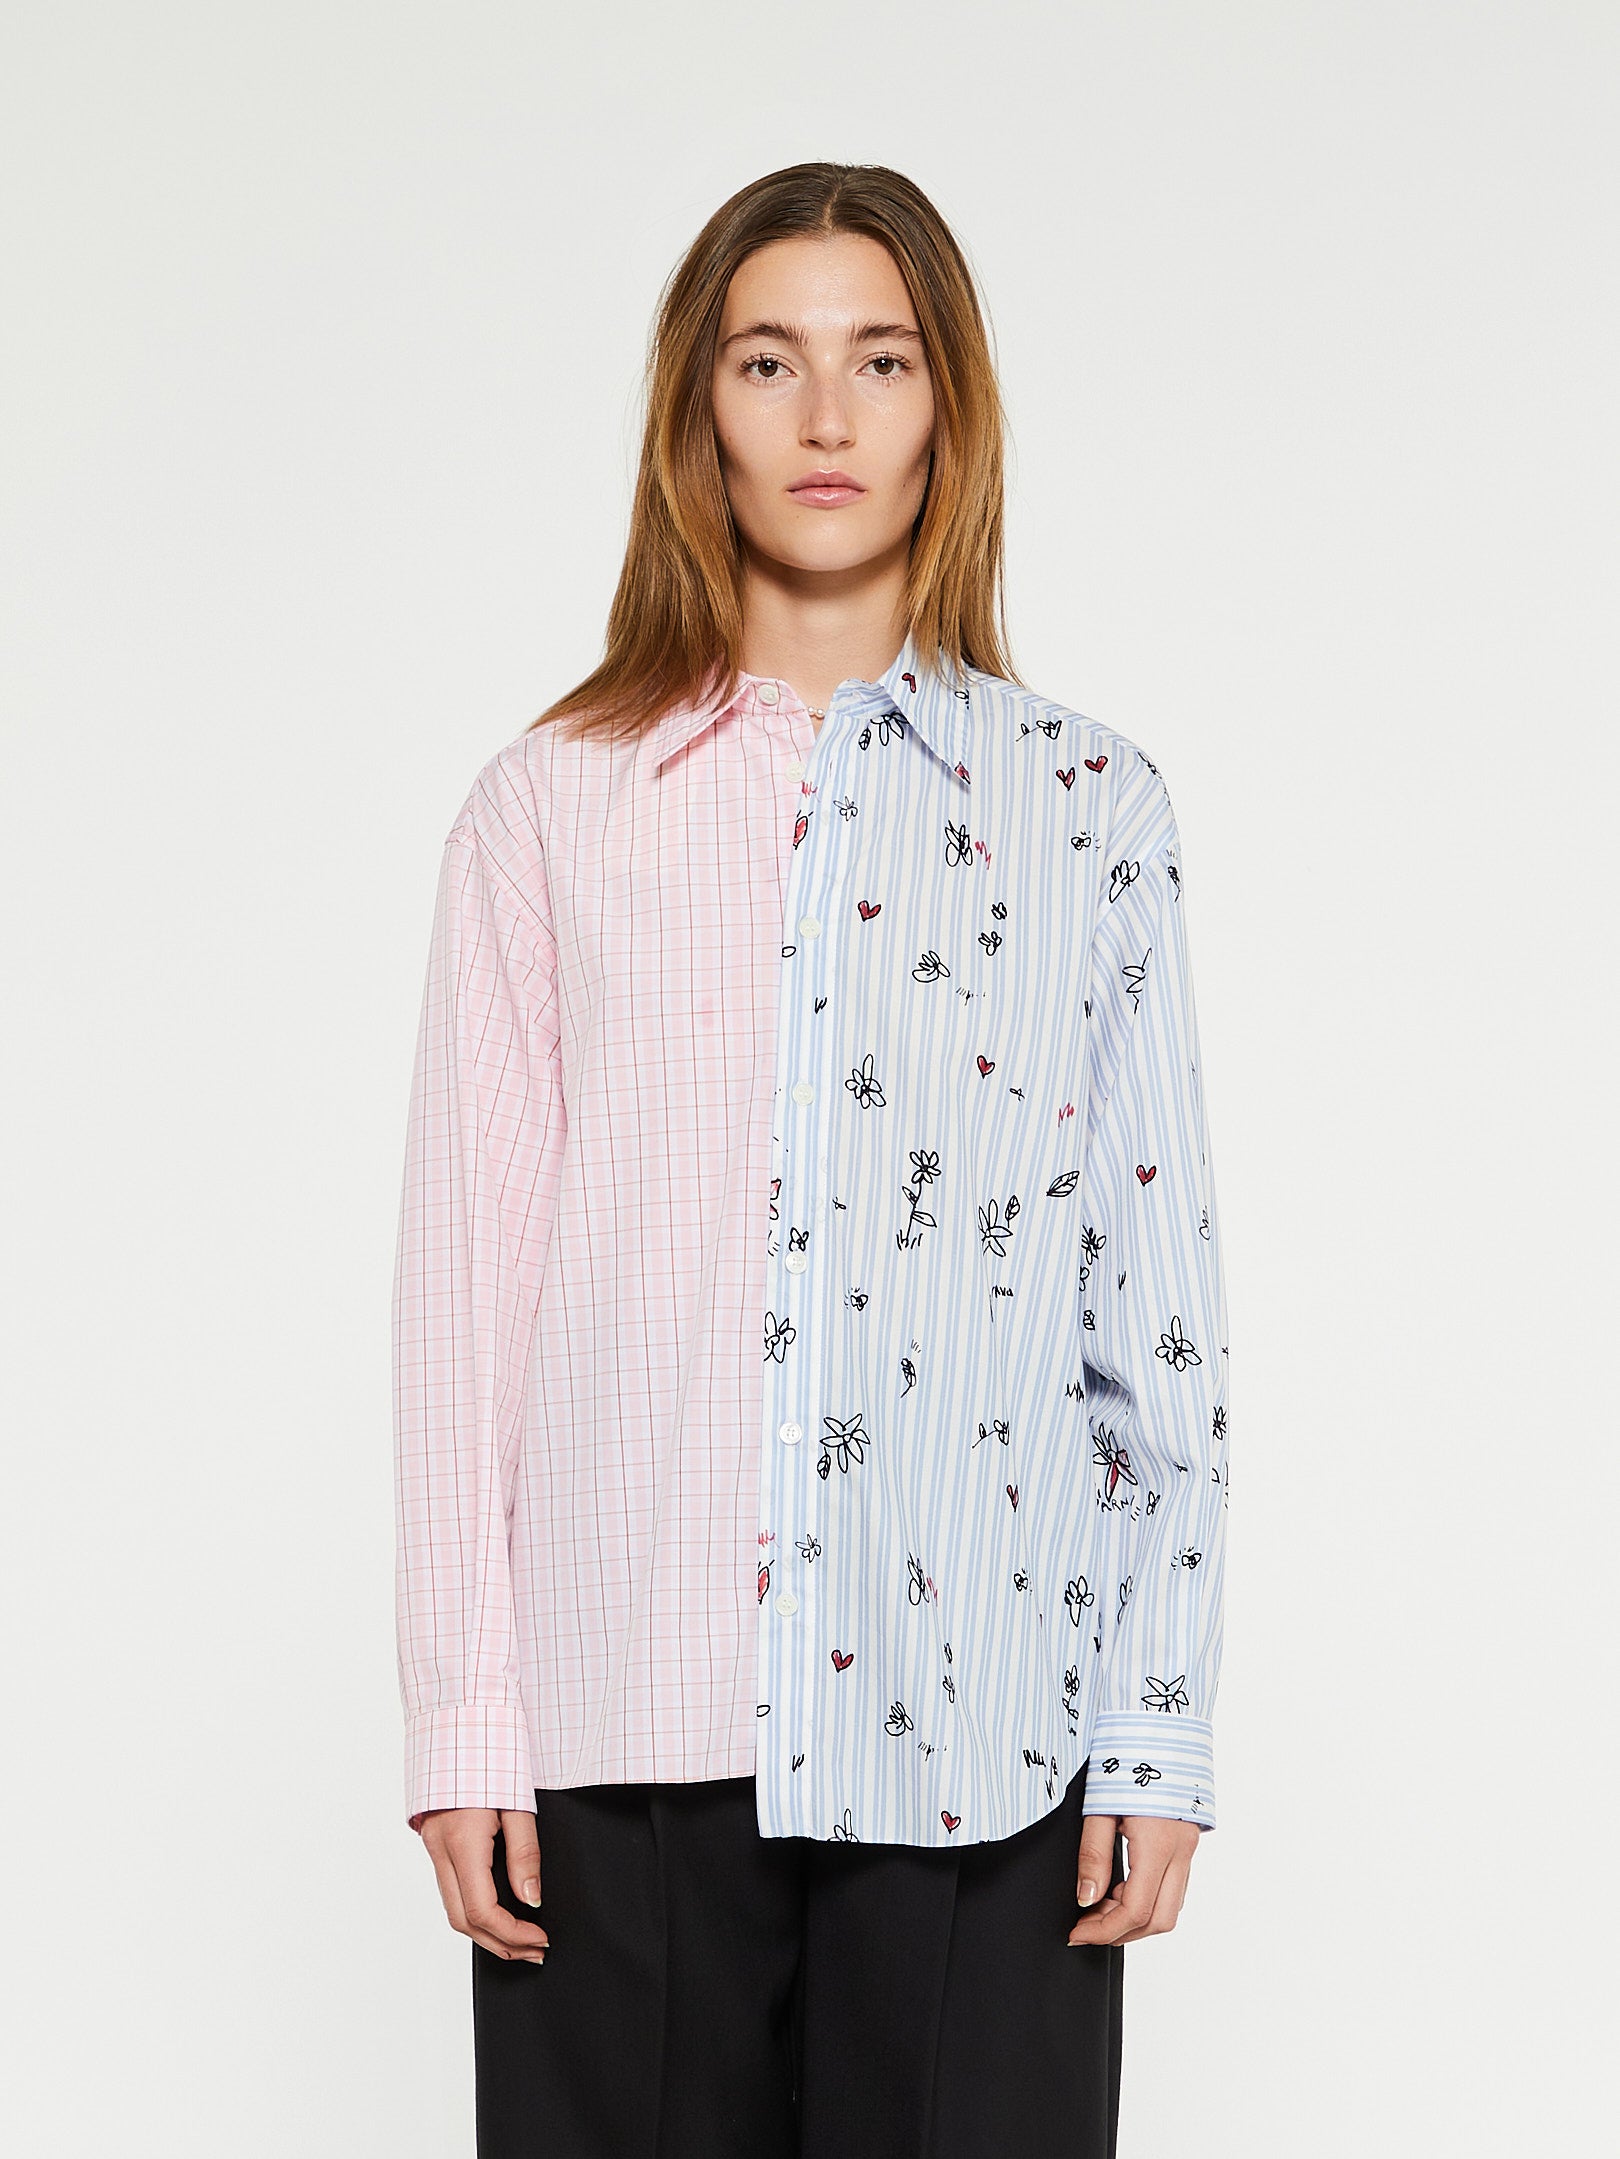 Marni - Shirt in Pink and Blue